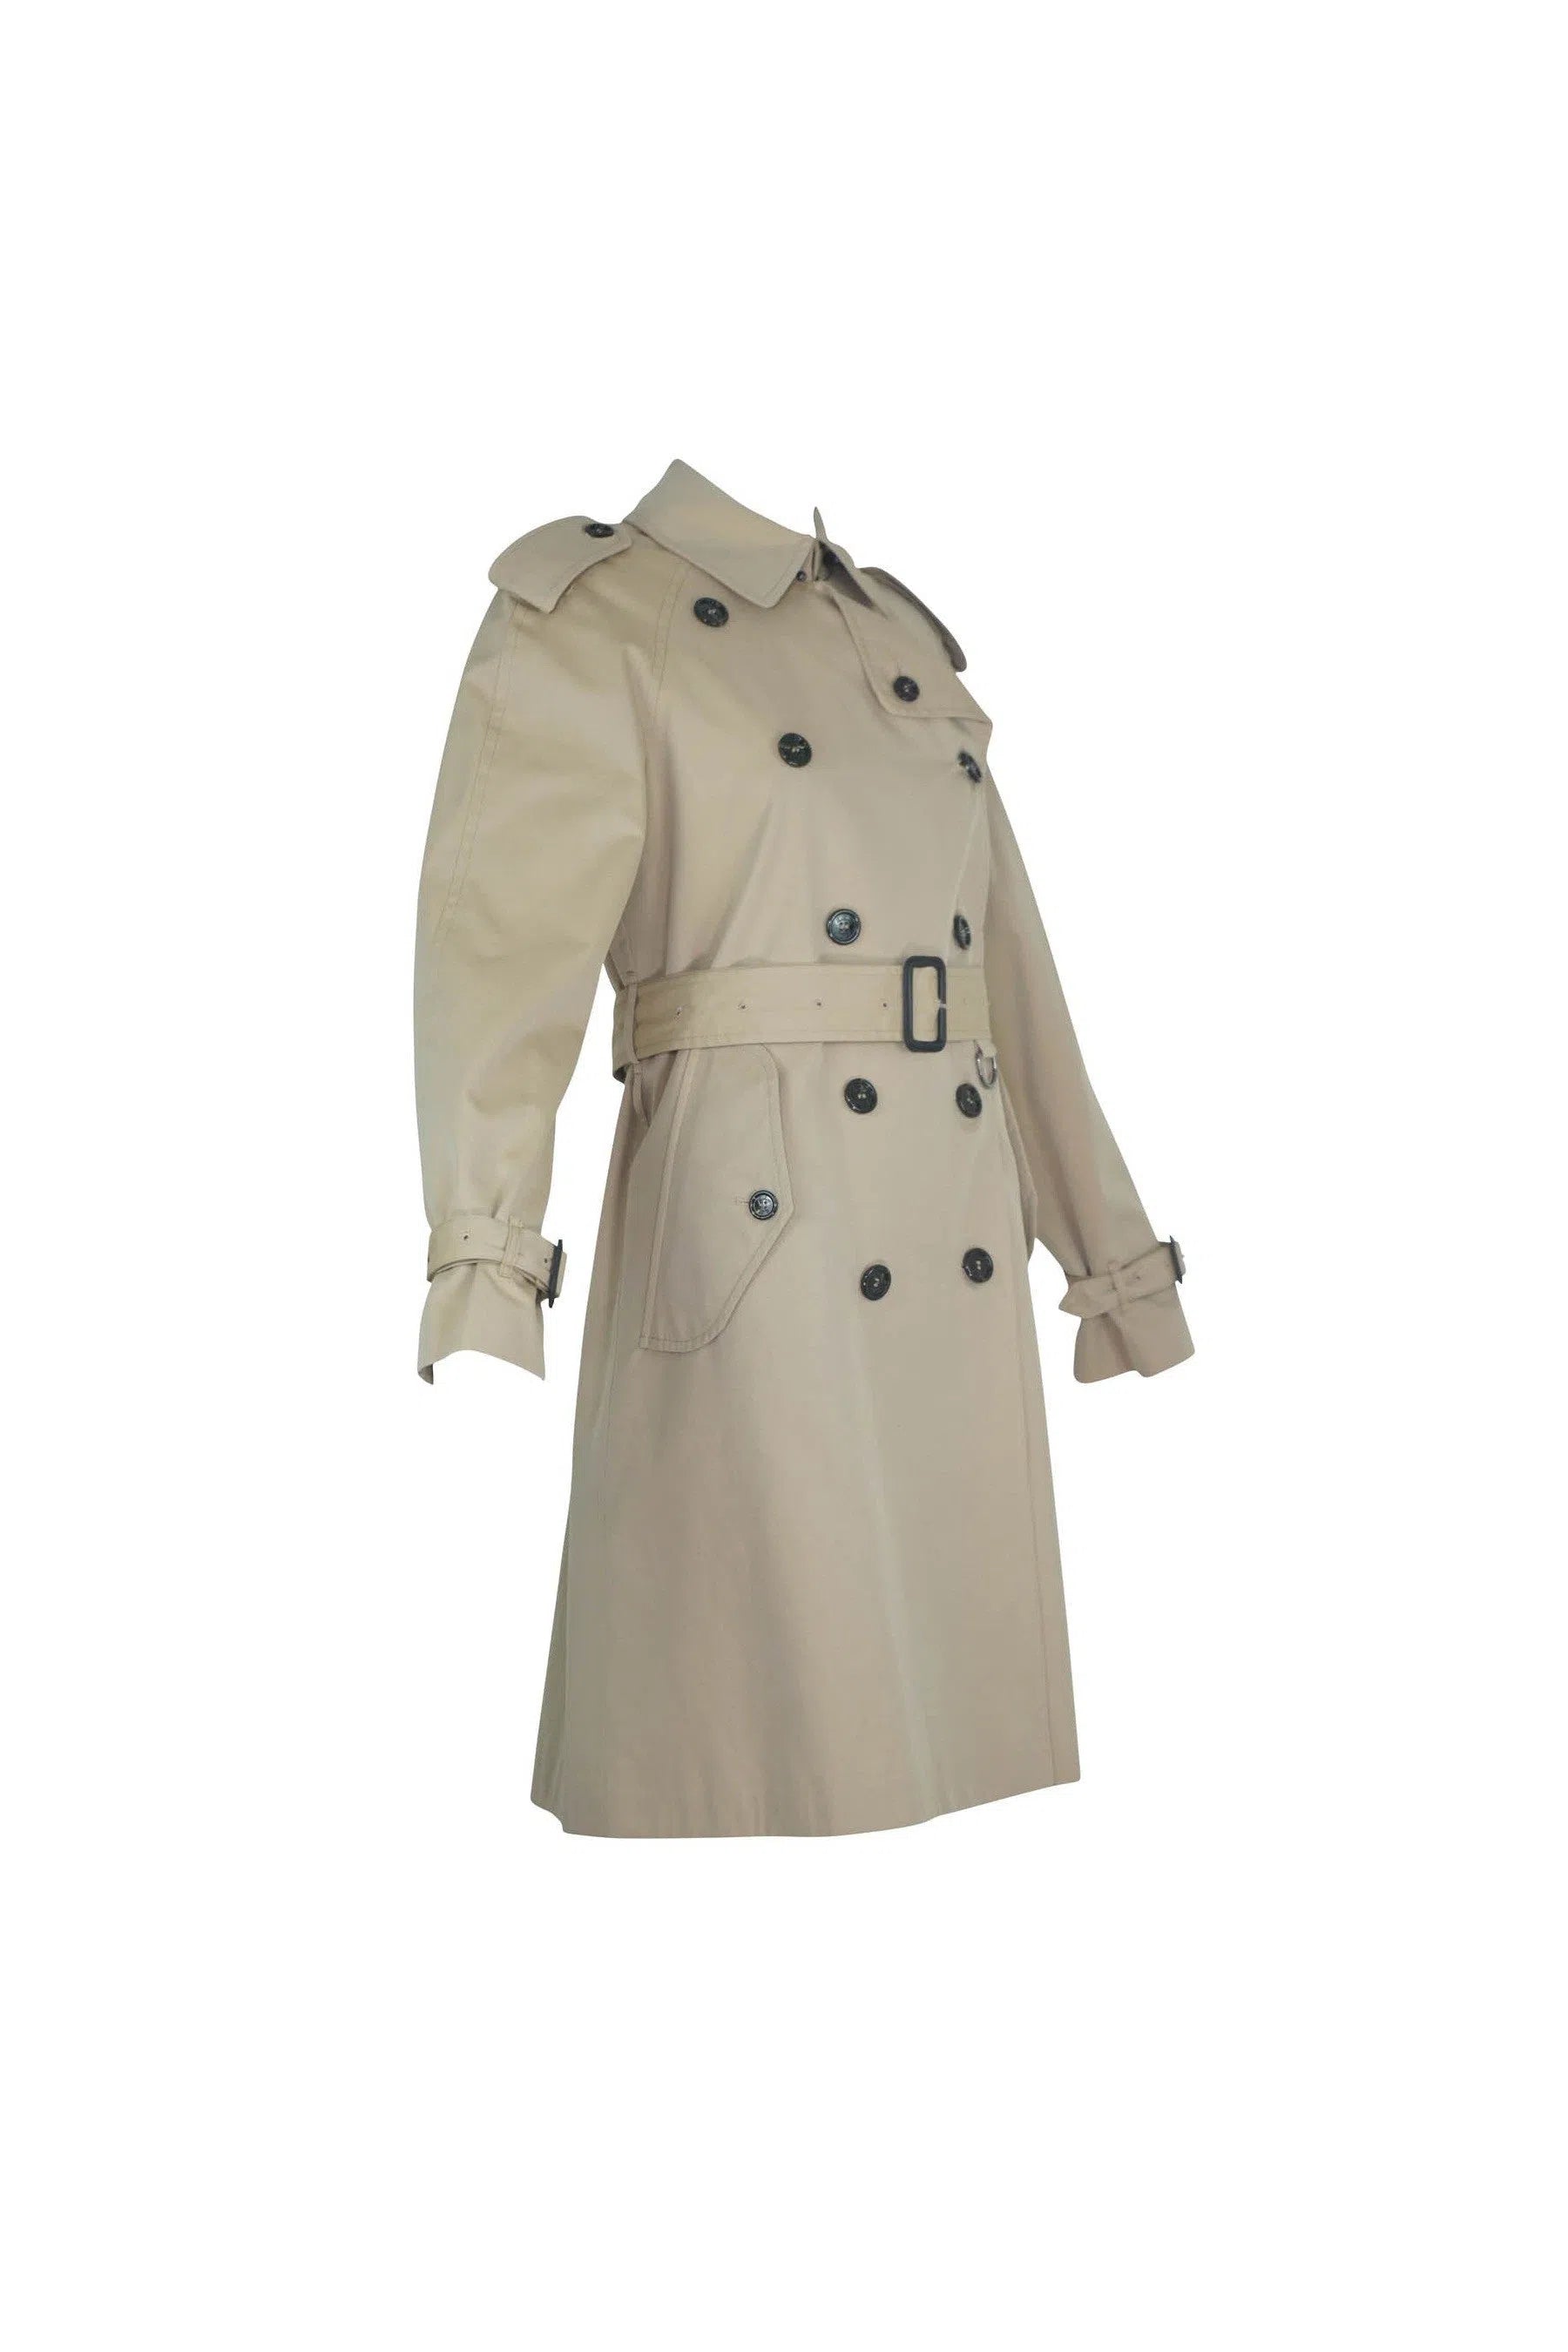 Burberry London Classic Belted Trench Coat Size 6 - Foxy Couture Carmel